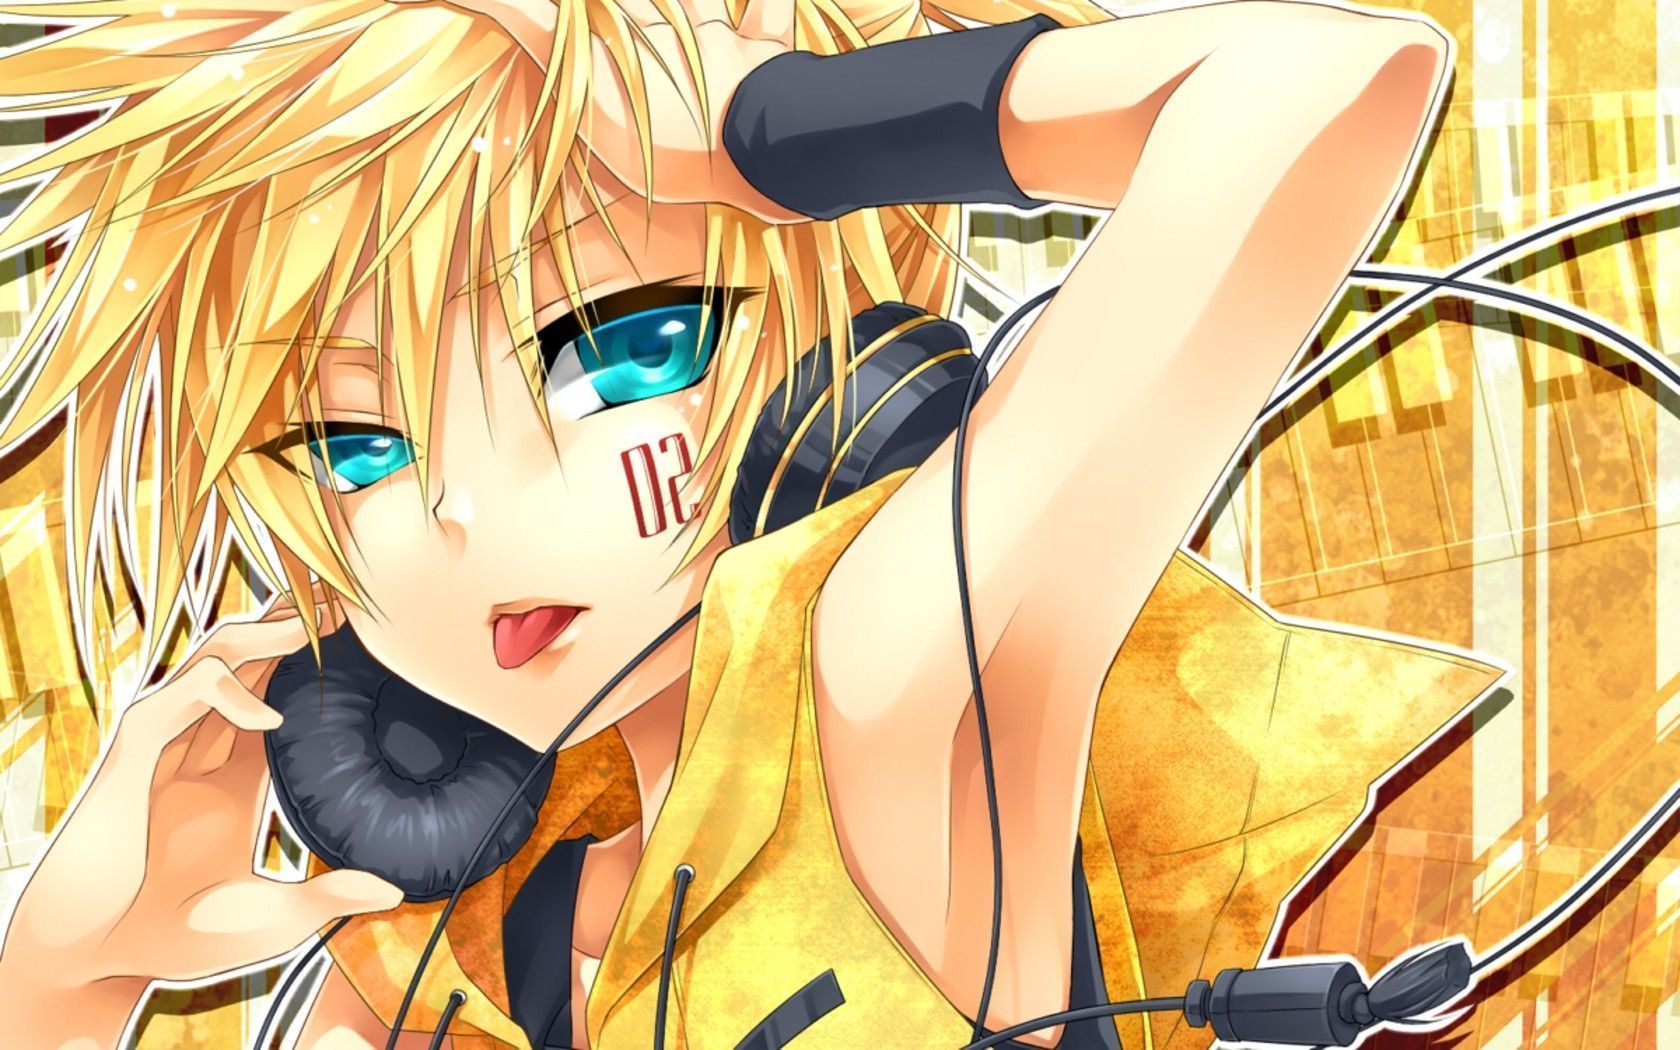 Download Wallpaper 1680x1050 Anime, Girl, Blond, Tongue ...